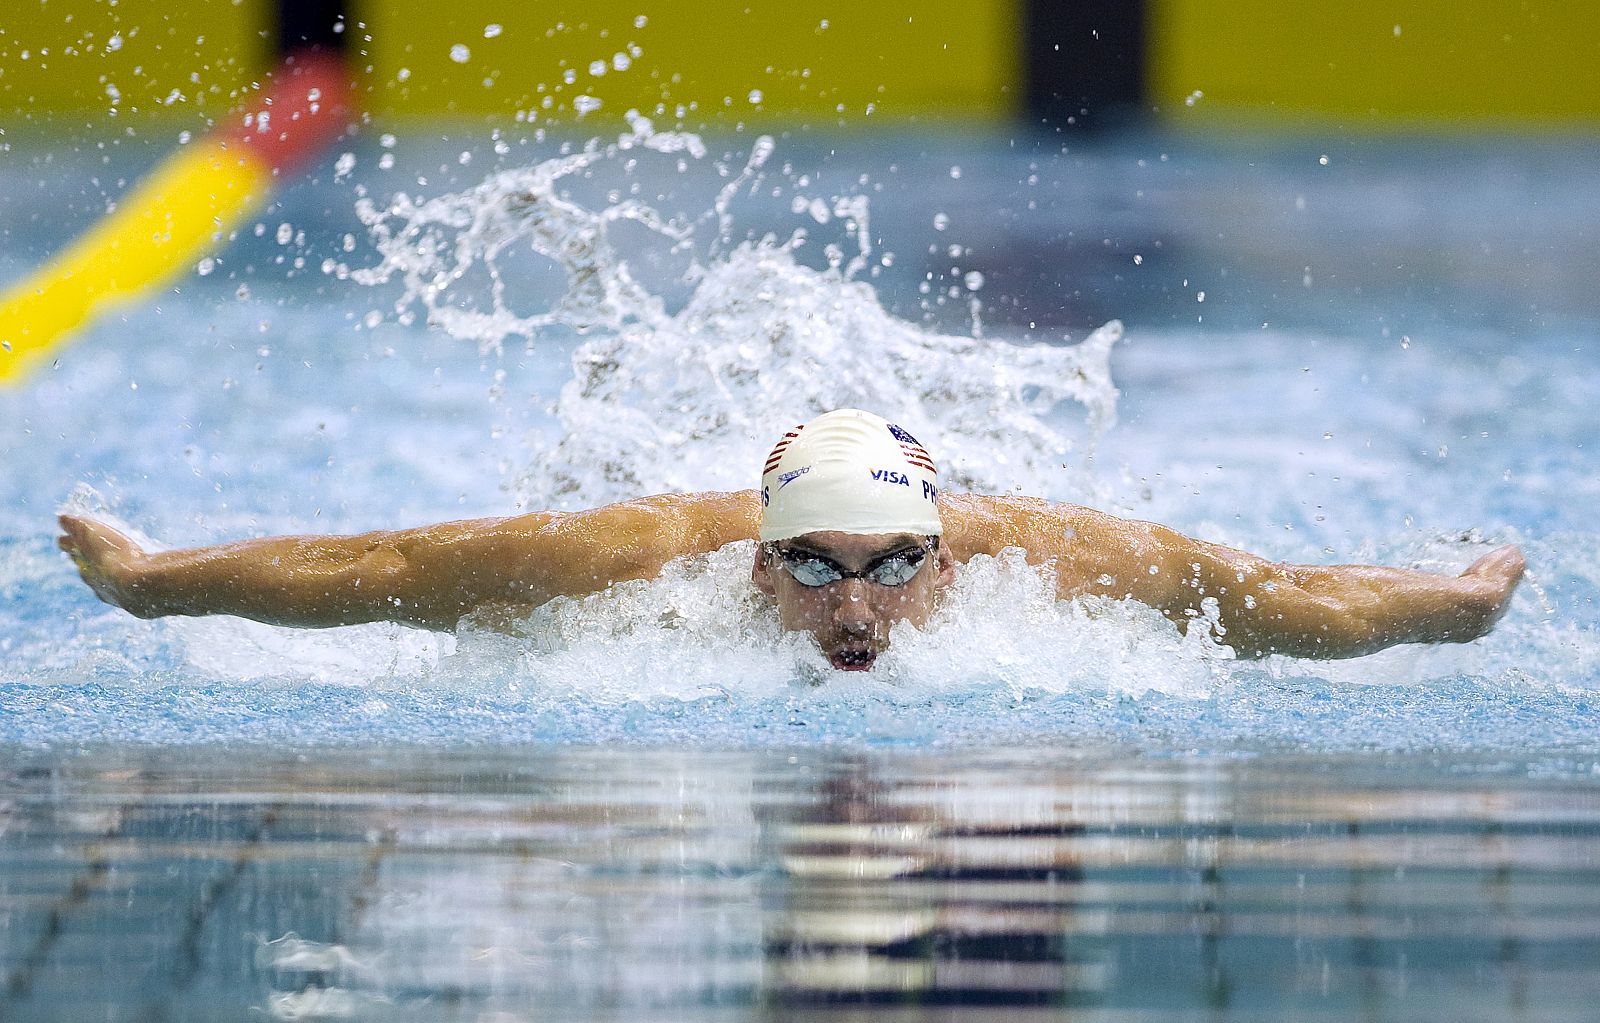 Michael Phelps swims to win in 100m butterfly at Canada Cup swimming competition in Montreal